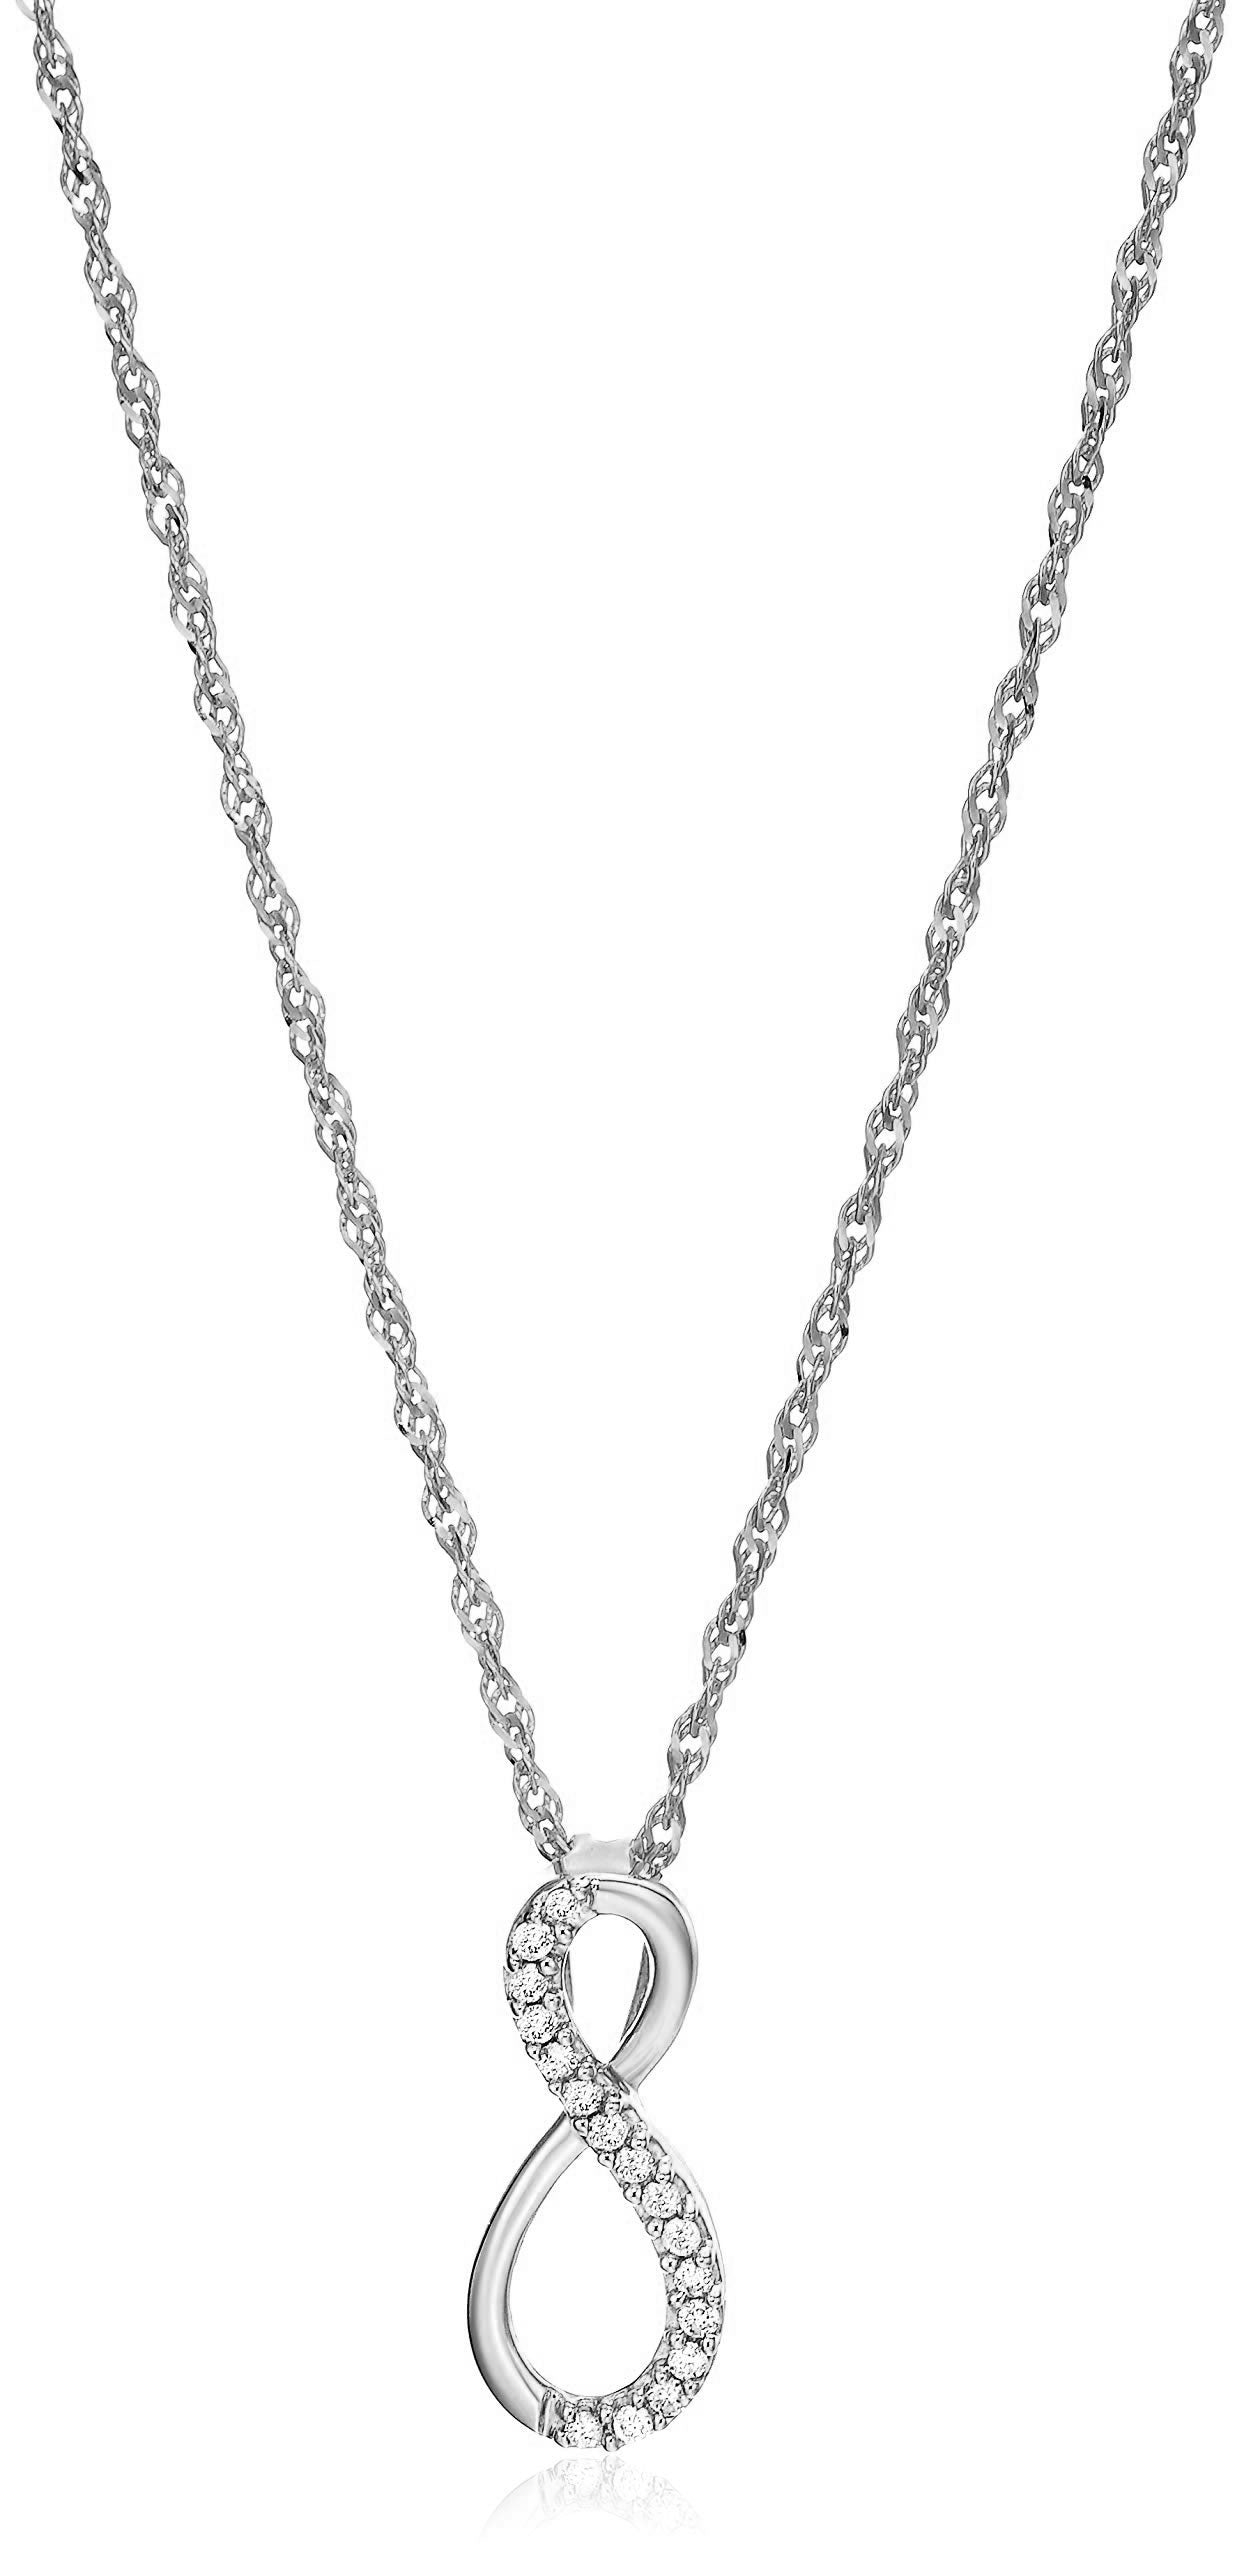 1/10 cttw Diamond Pendant, Diamond Infinity Pendant Necklace for Women in 10K White Gold with 18 Inch Chain, Prong Setting